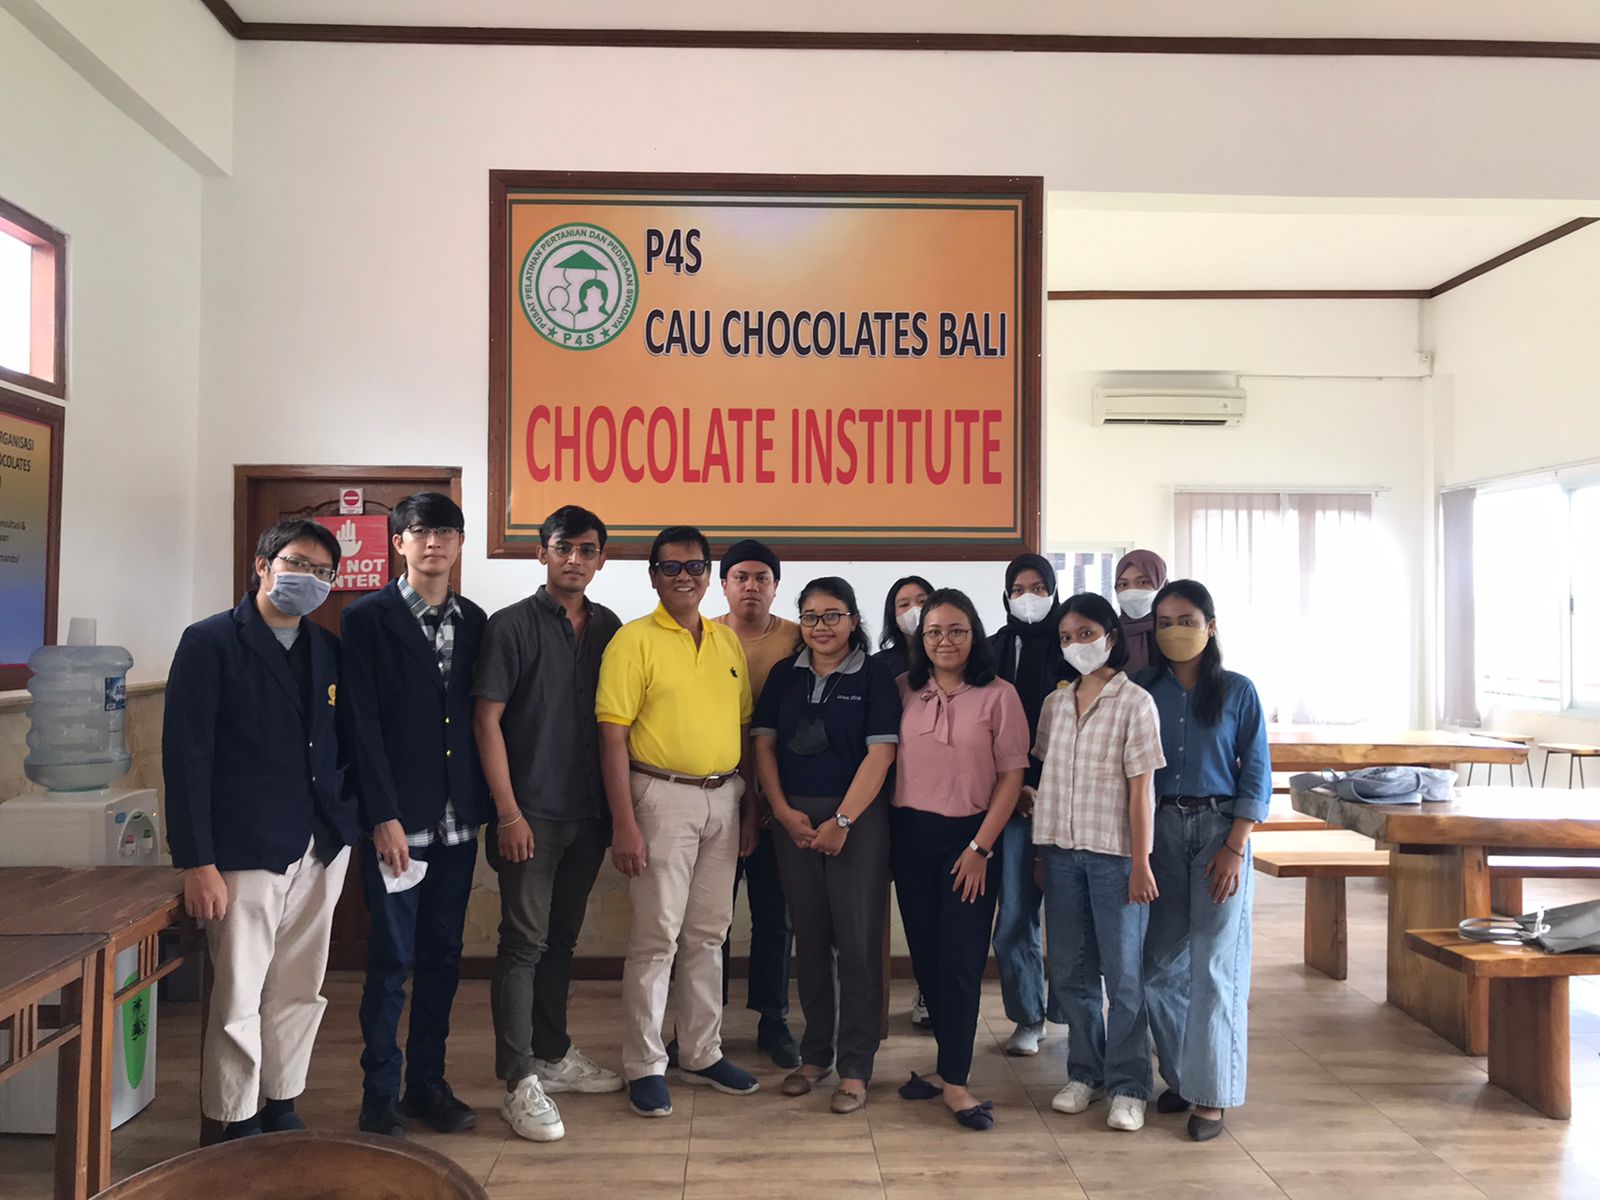 Realization of Cooperation, Food Technology Study Program Conducts Field Practicum of Cocoa Technology Course at PT Cau Chocolate Internasional